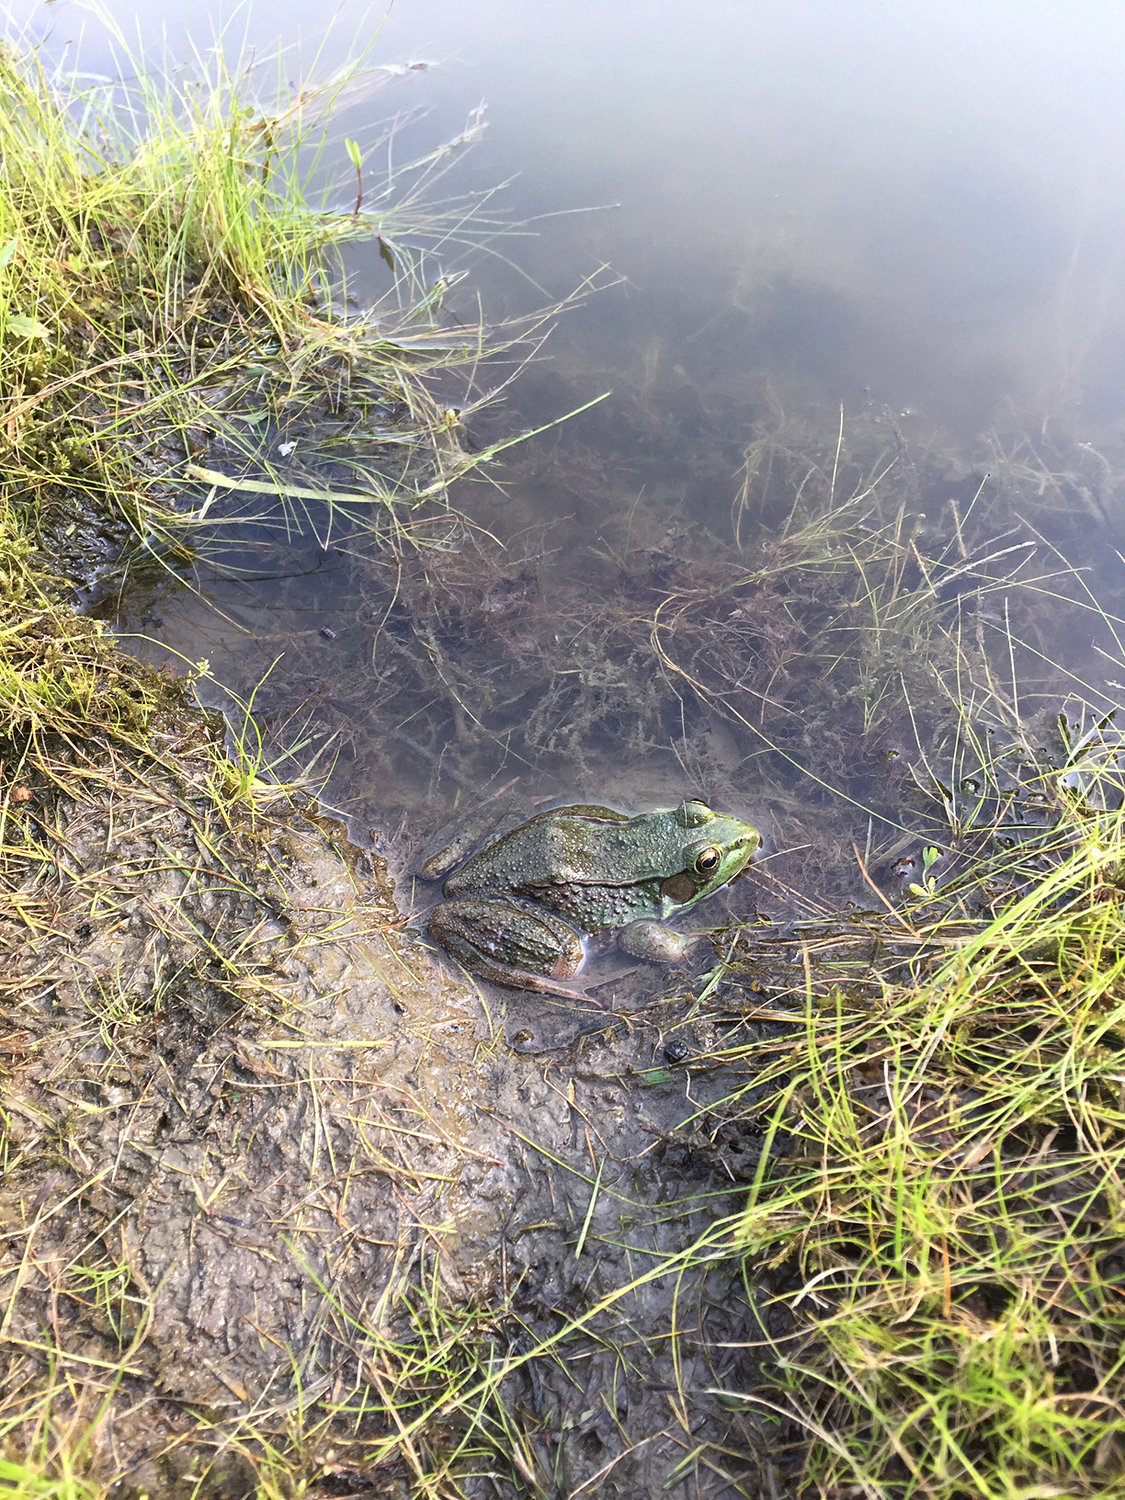 Snapshot of the magical frog in the pond behind the inn in Vermont.